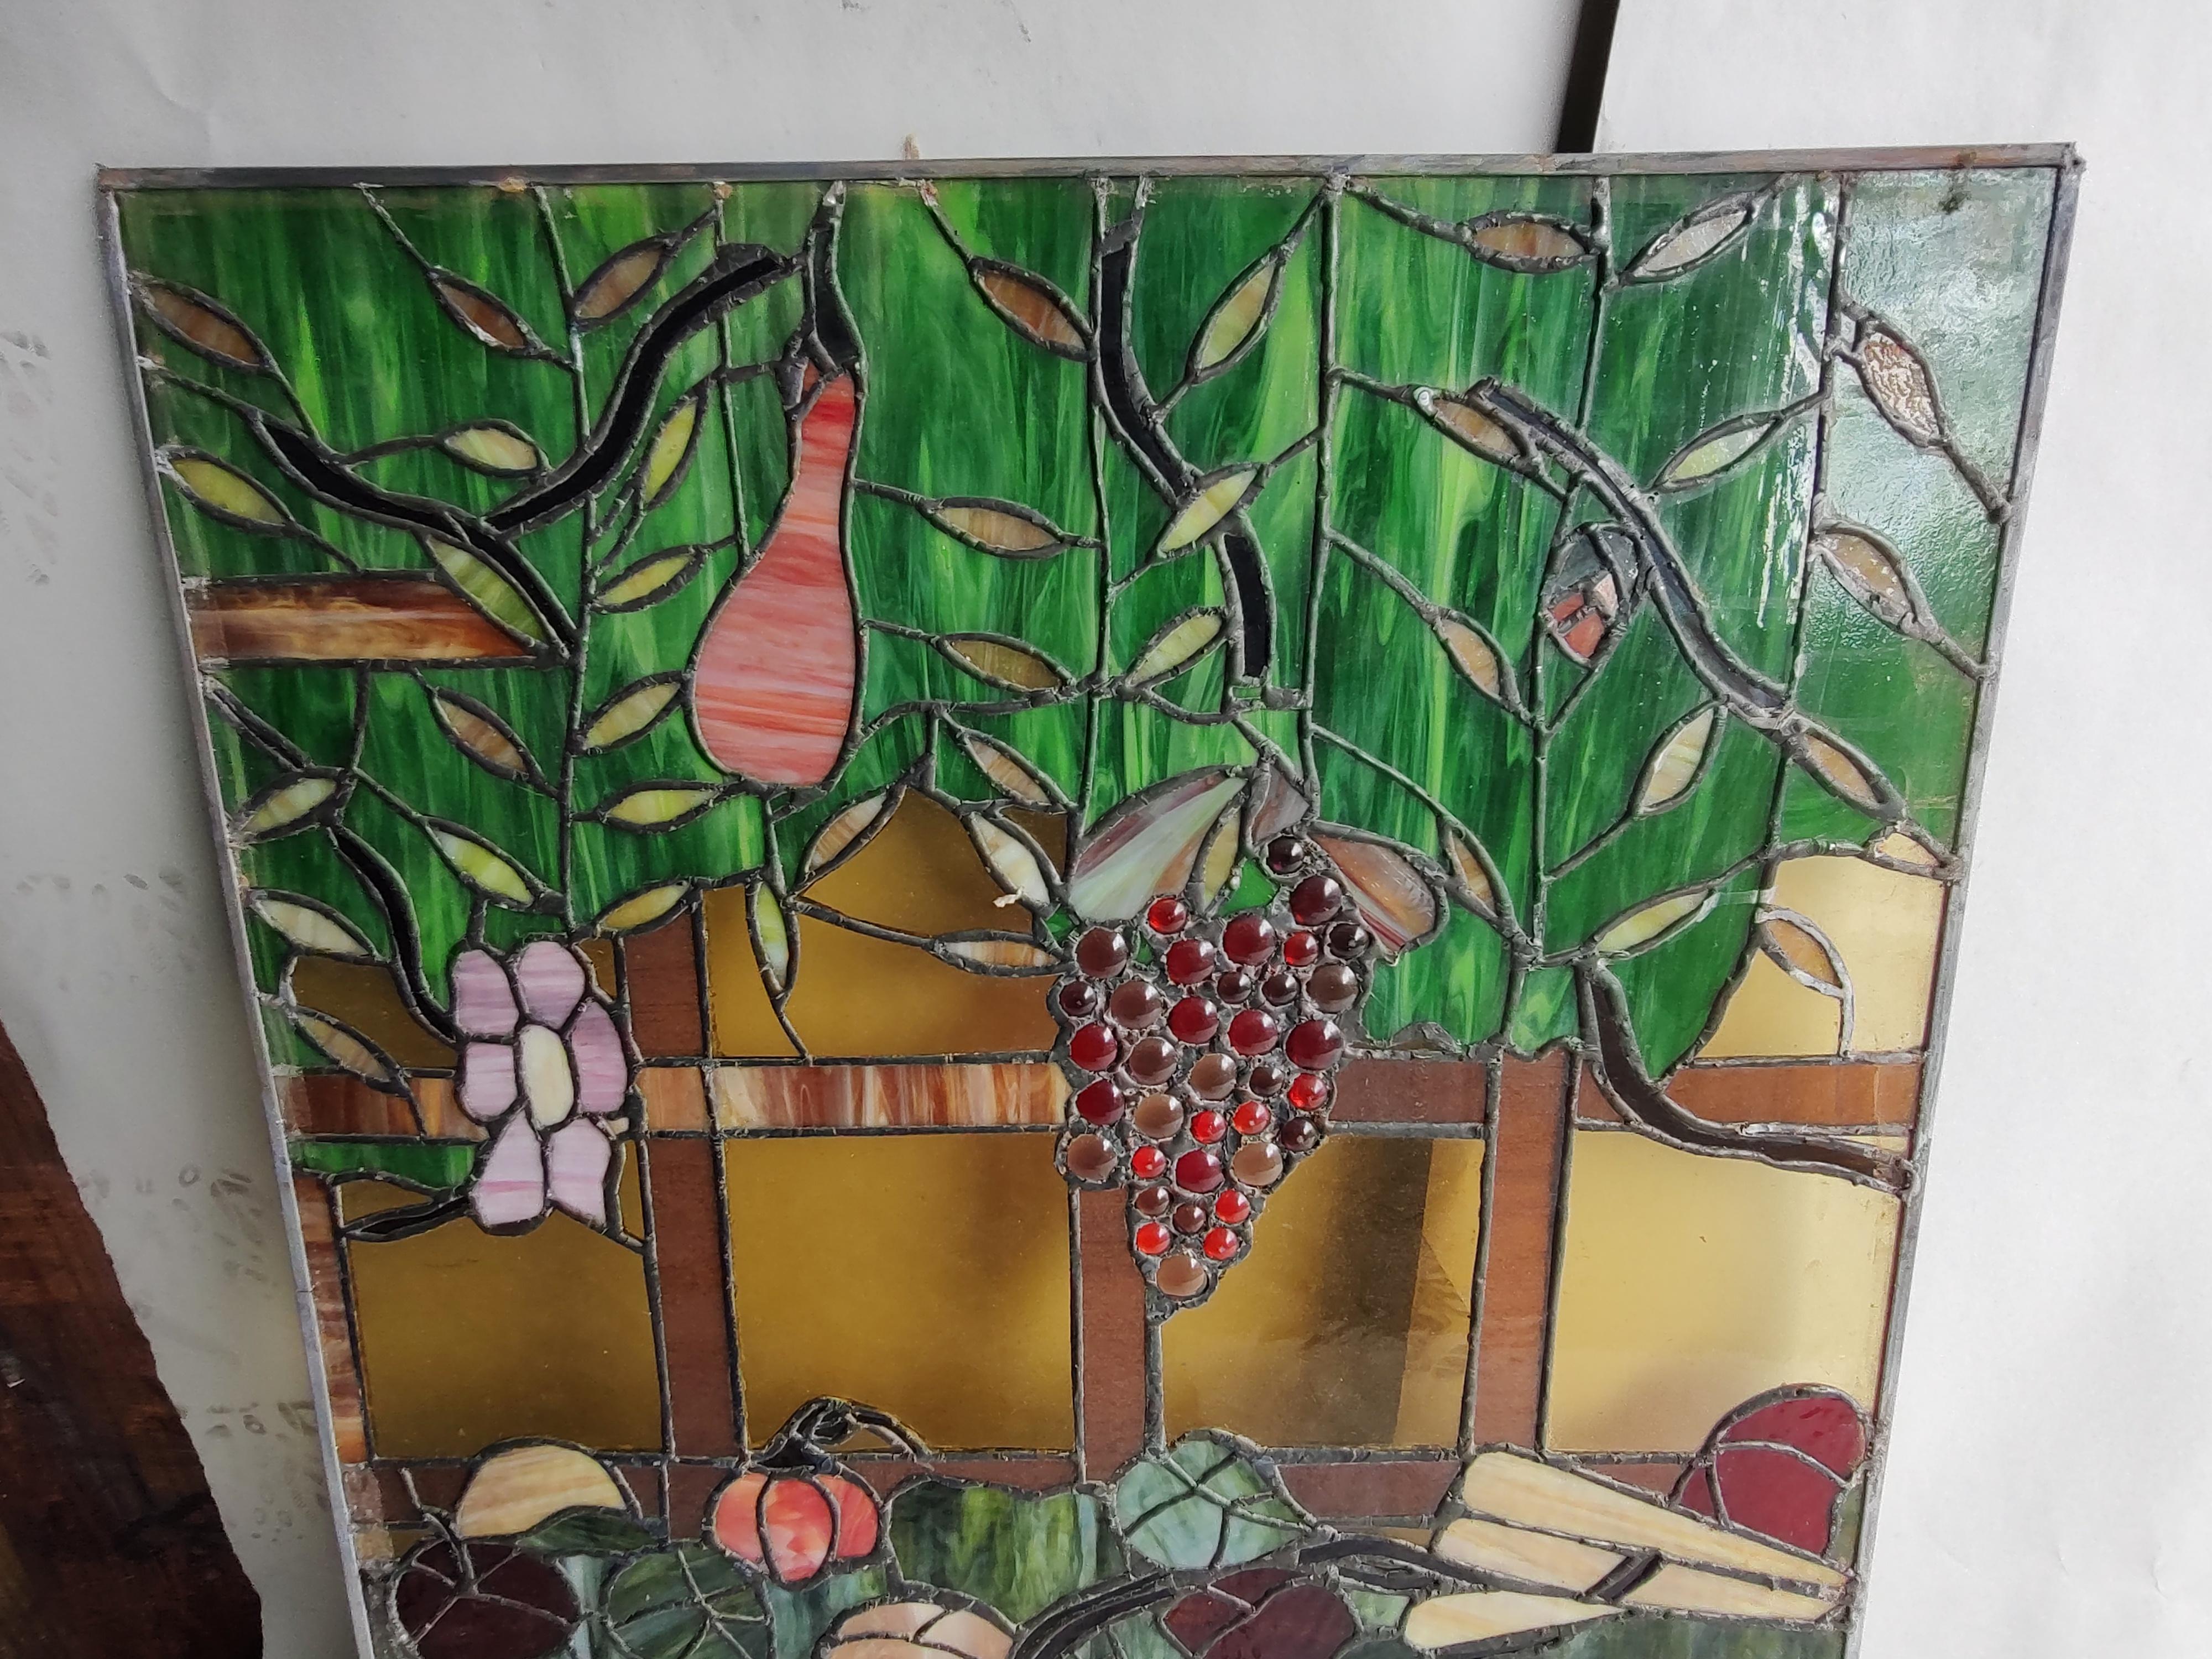 Mid-20th Century Midcentury Stained Glass Window Panels by Rainbow Studios NY, circa 1965 #2 For Sale